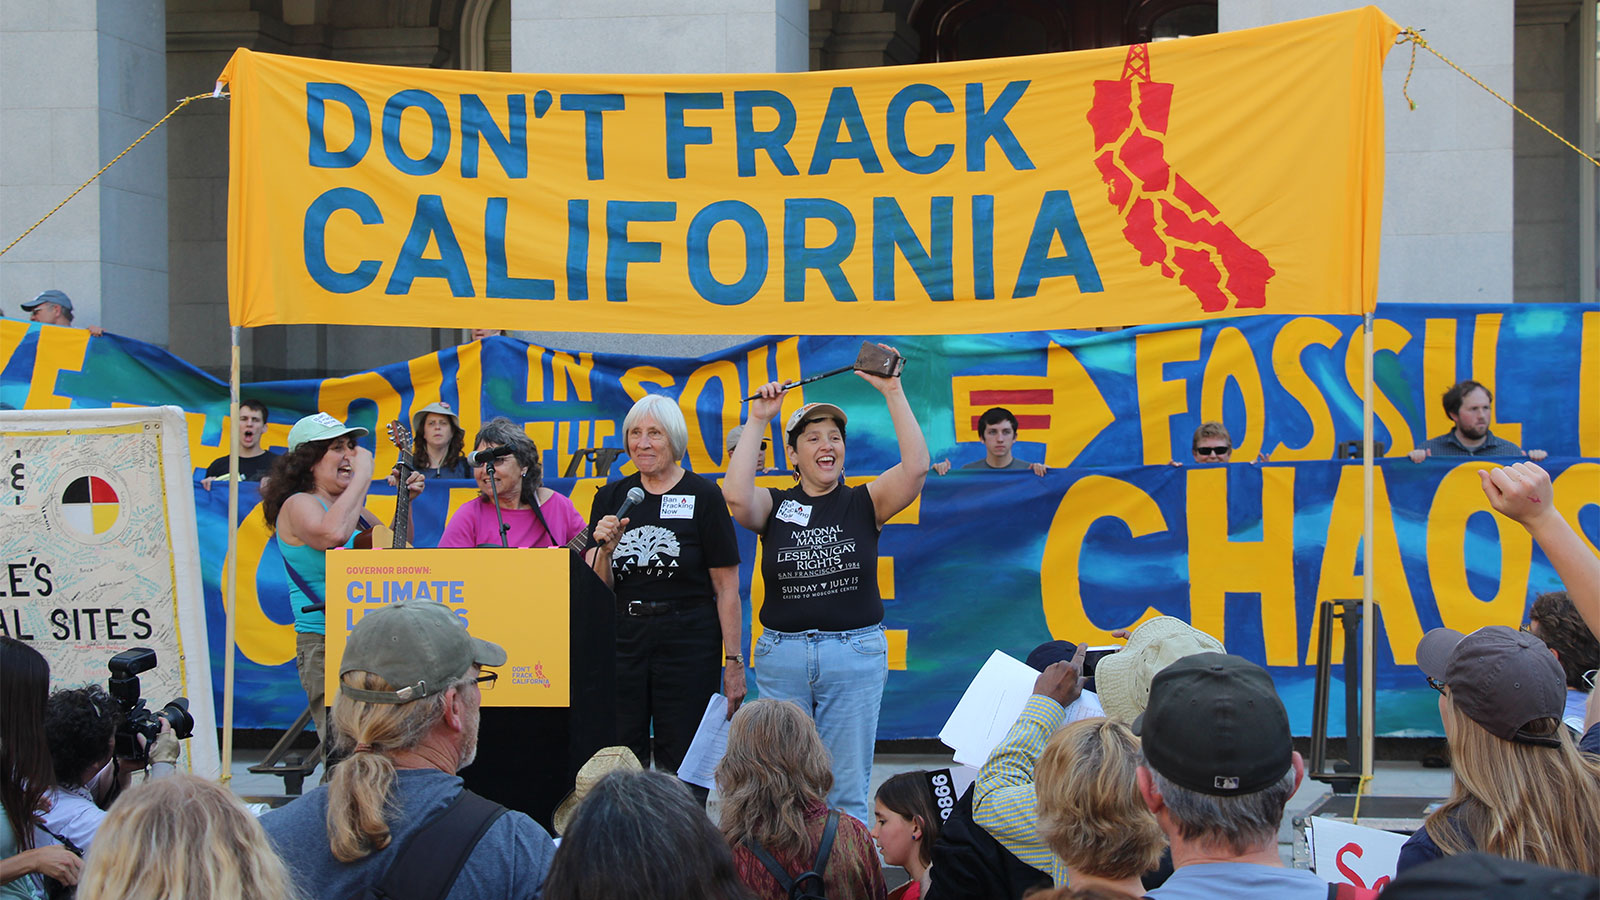 A protest against fracking in California